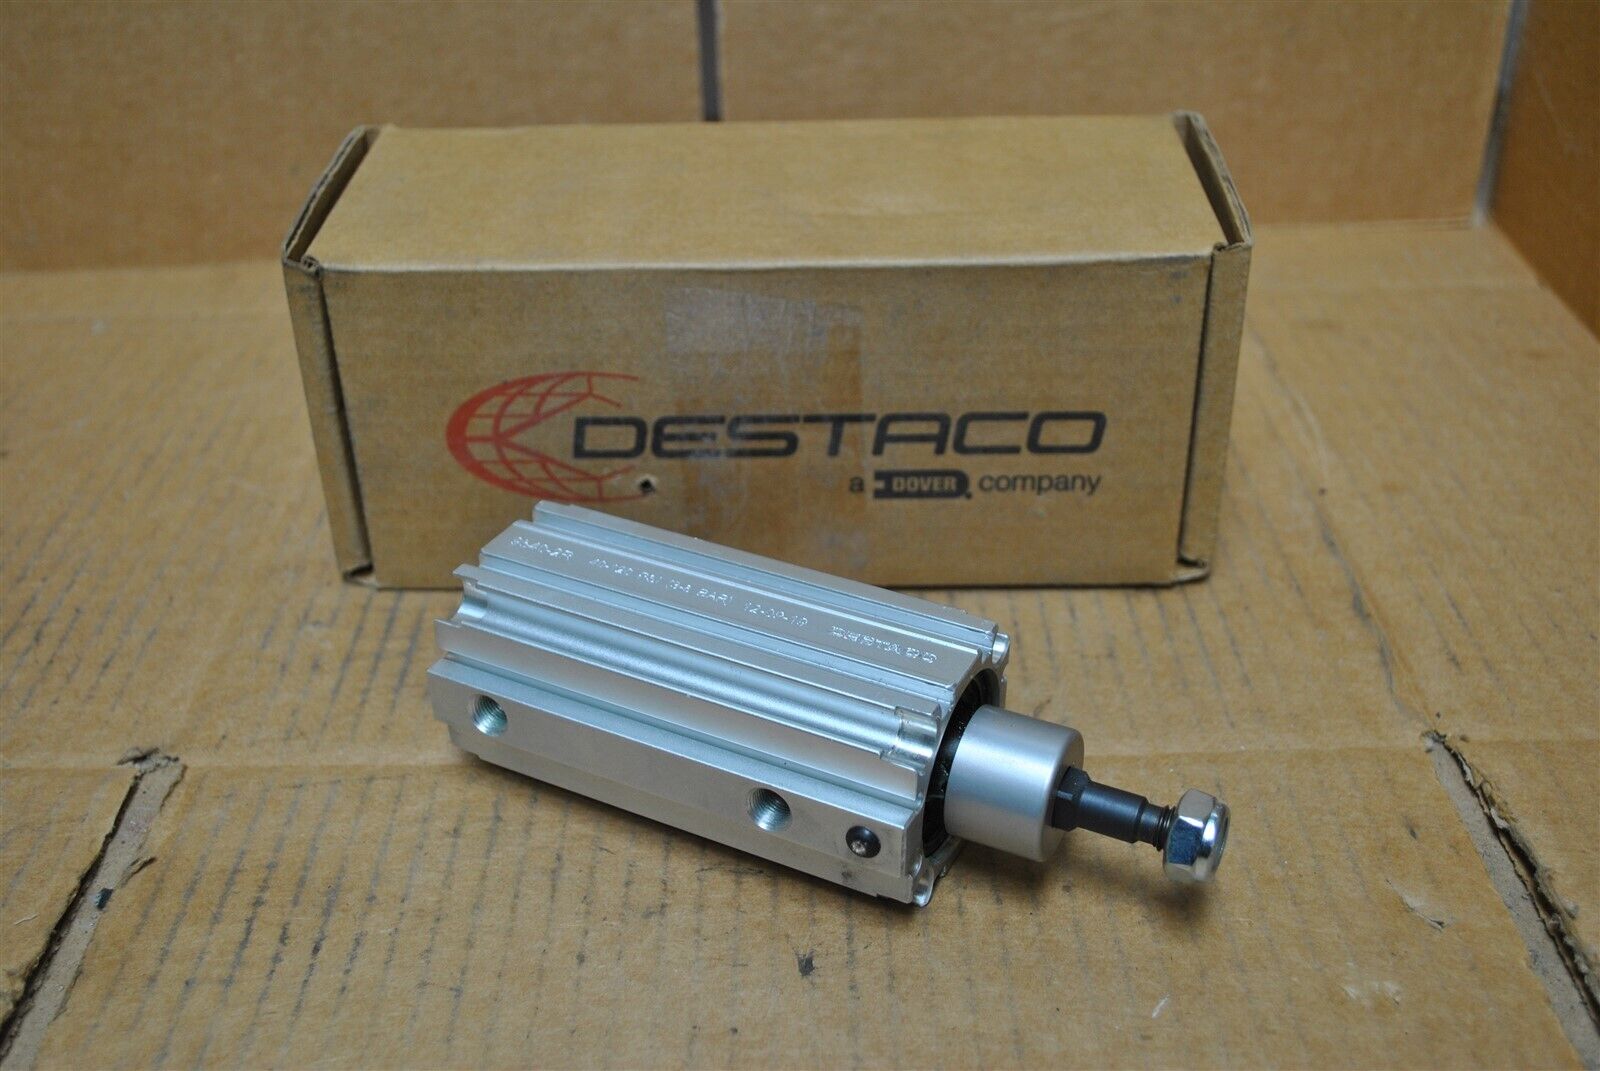 DE-STA-CO Pneumatic Swing Clamp - New in Box - Part No. 9540-2R